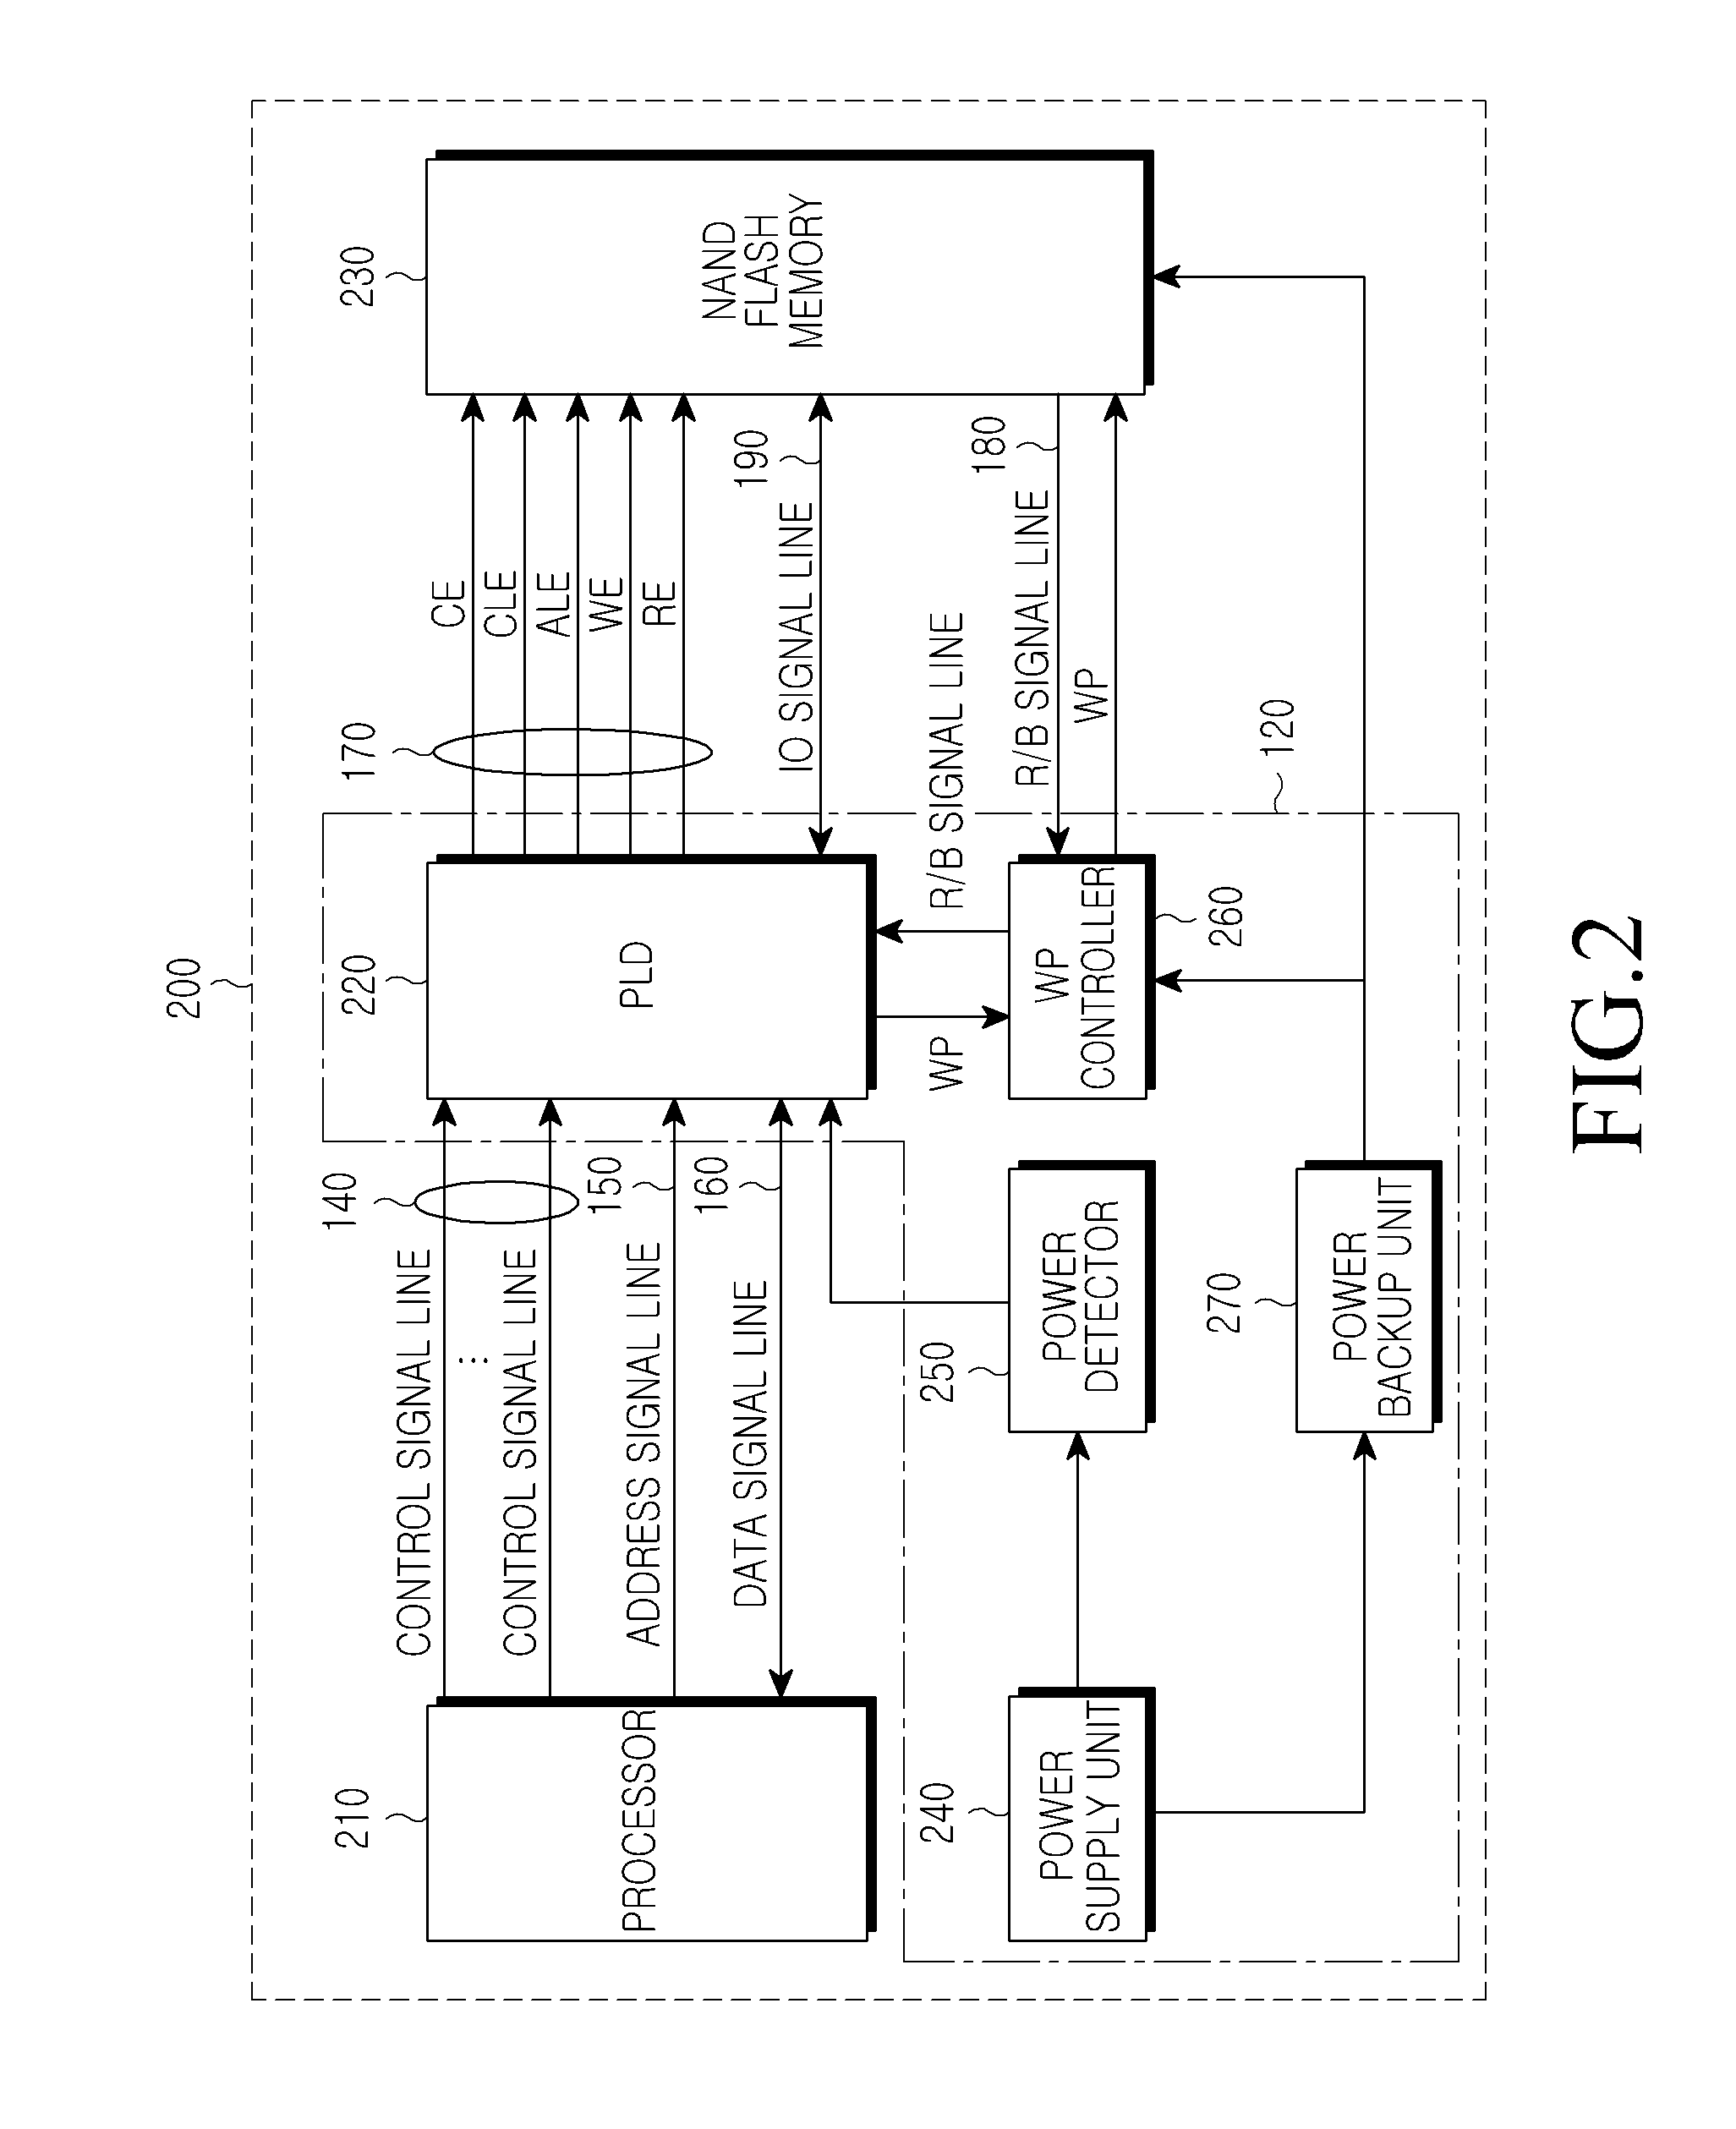 Apparatus and method for protecting data in flash memory